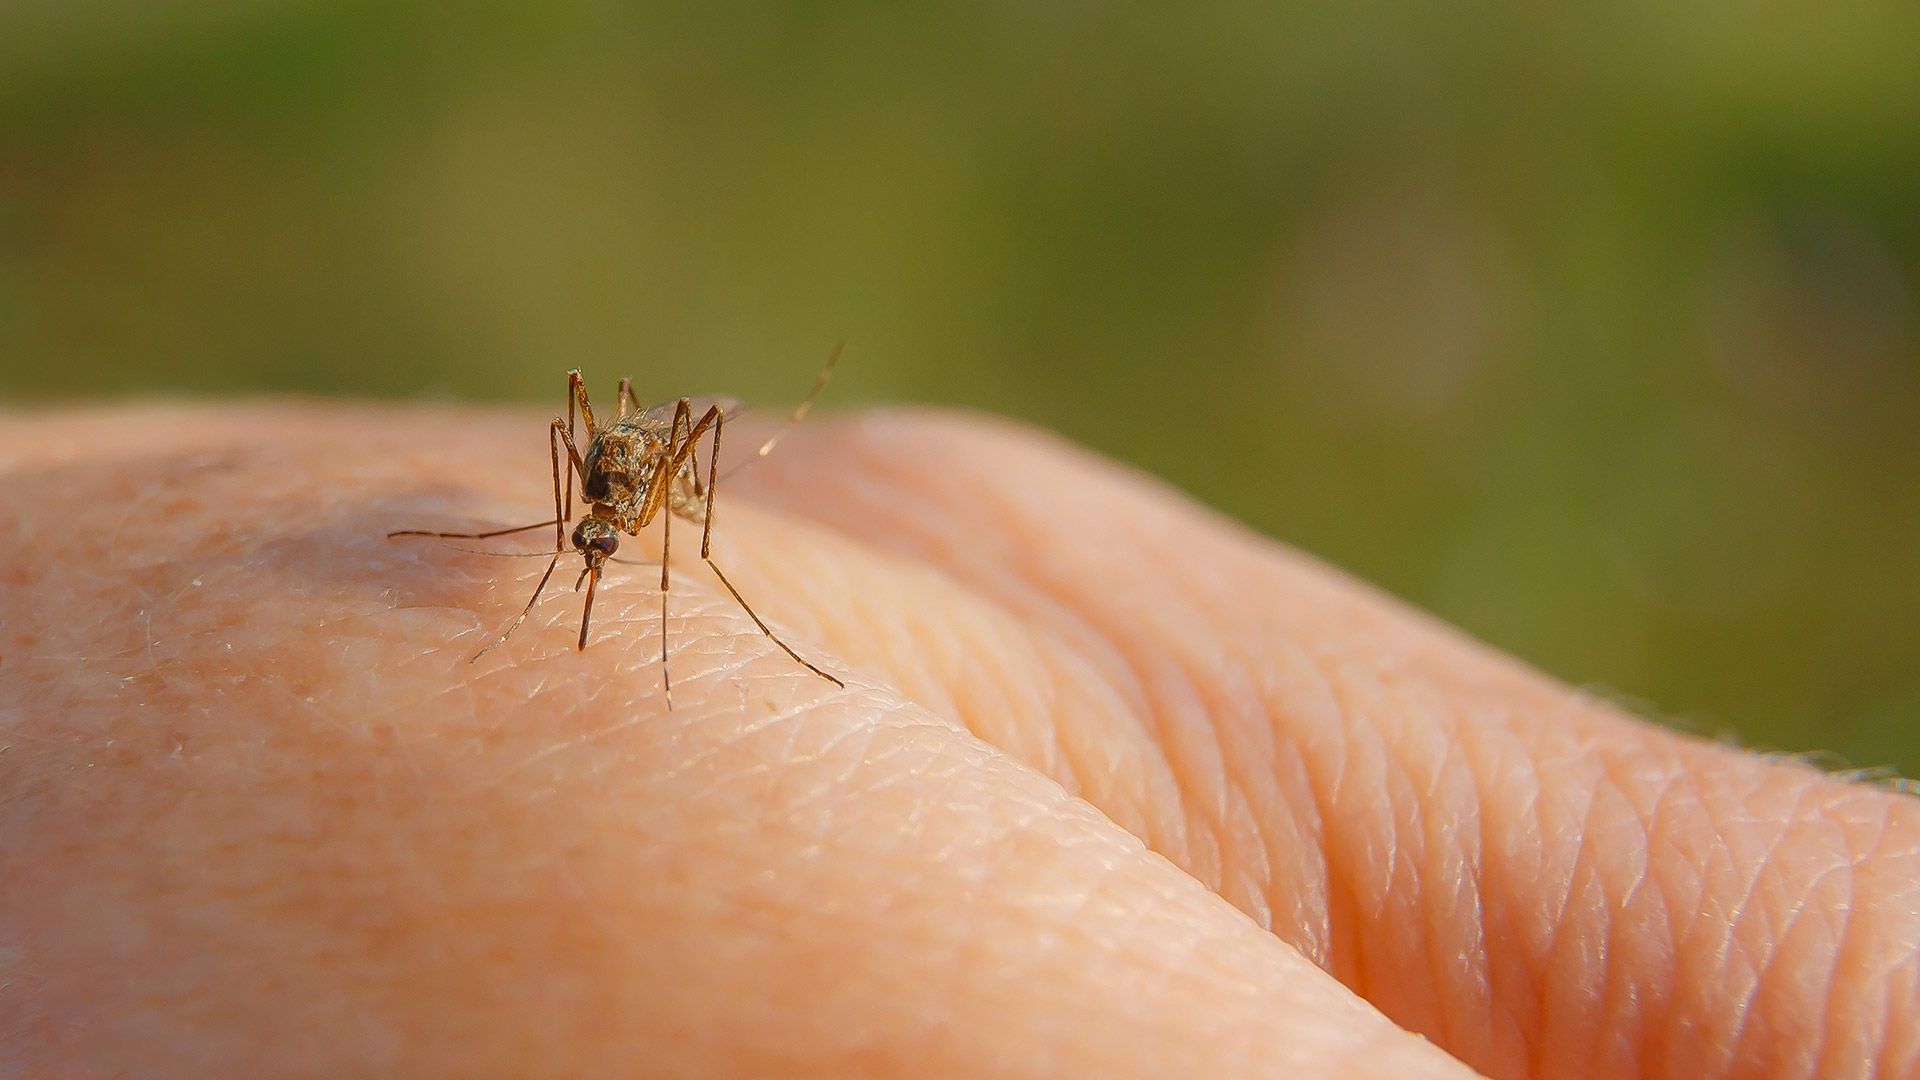 A mosquito on a hand in Plano, TX. 